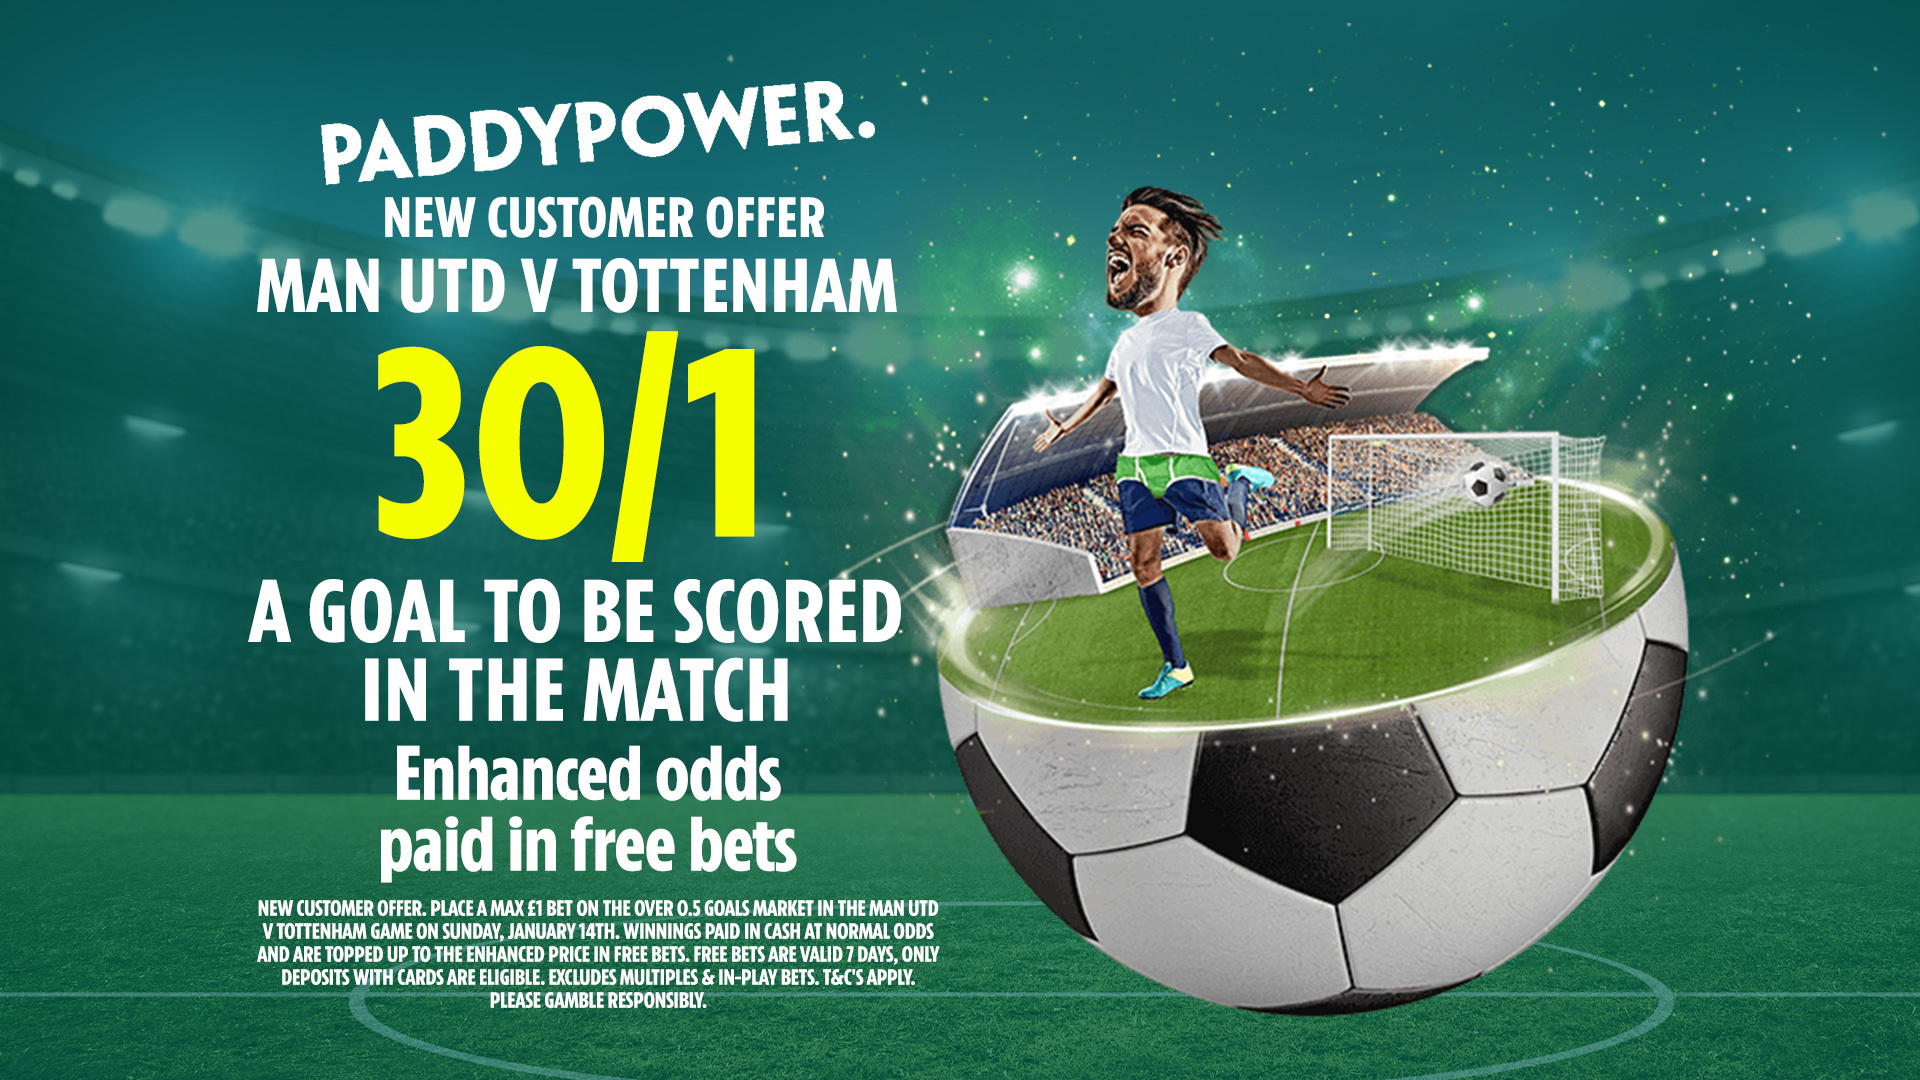 Man Utd vs Tottenham odds: Get 30/1 for 1+ goal to be scored on Sunday with Paddy Power